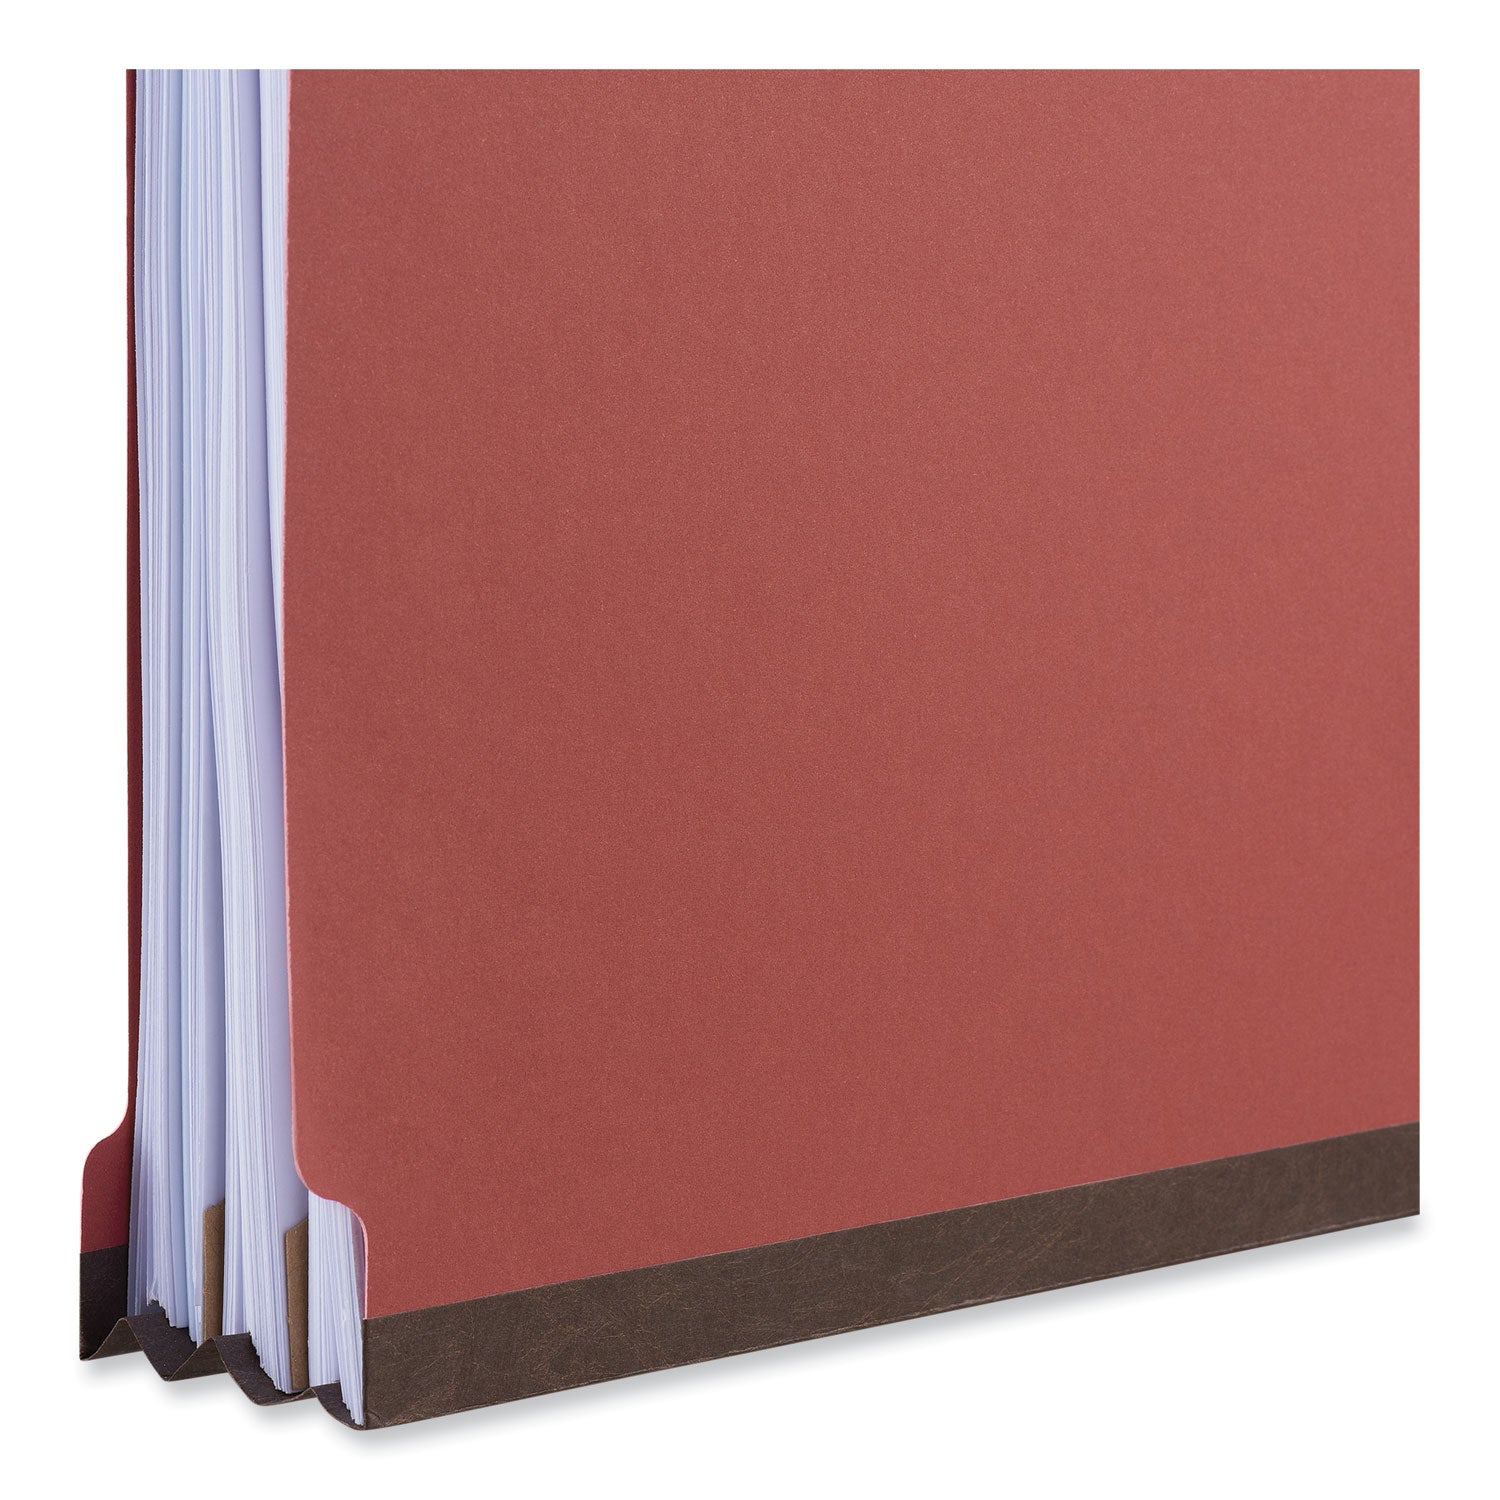 Bright Colored Pressboard Classification Folders, 2" Expansion, 1 Divider, 4 Fasteners, Letter Size, Ruby Red, 10/Box - 